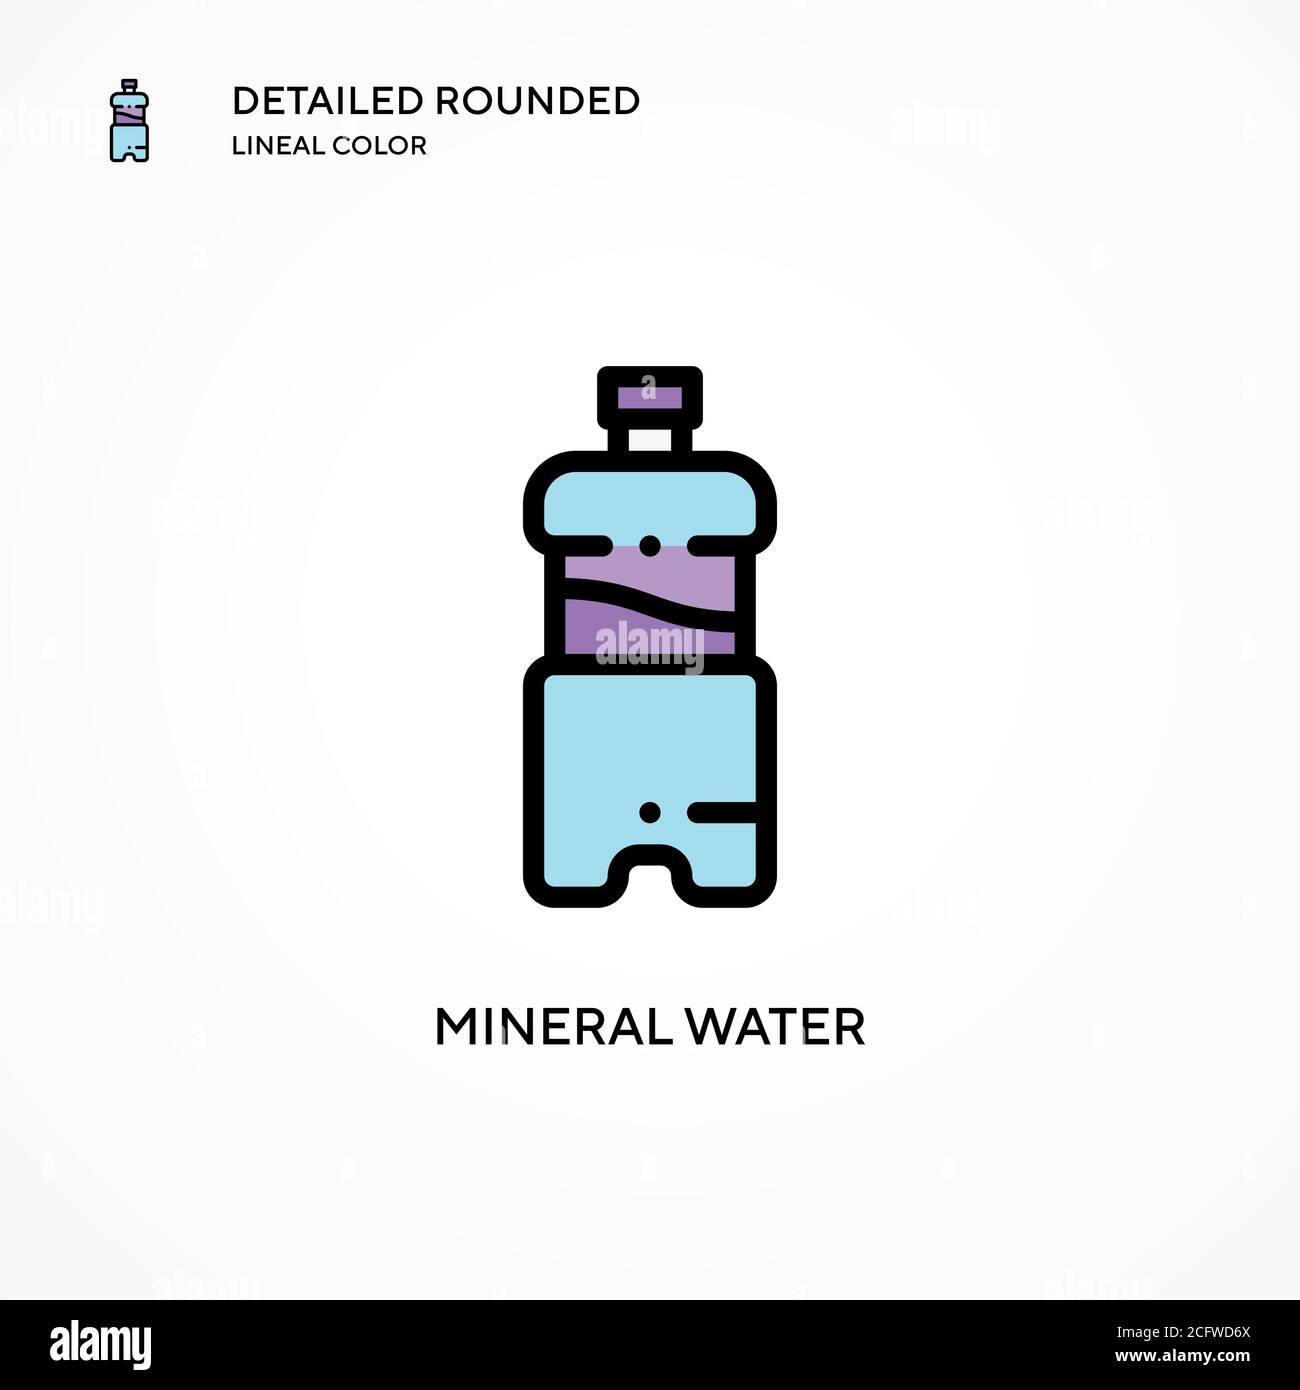 Mineral water vector icon. Modern vector illustration concepts. Easy to edit and customize. Stock Vector